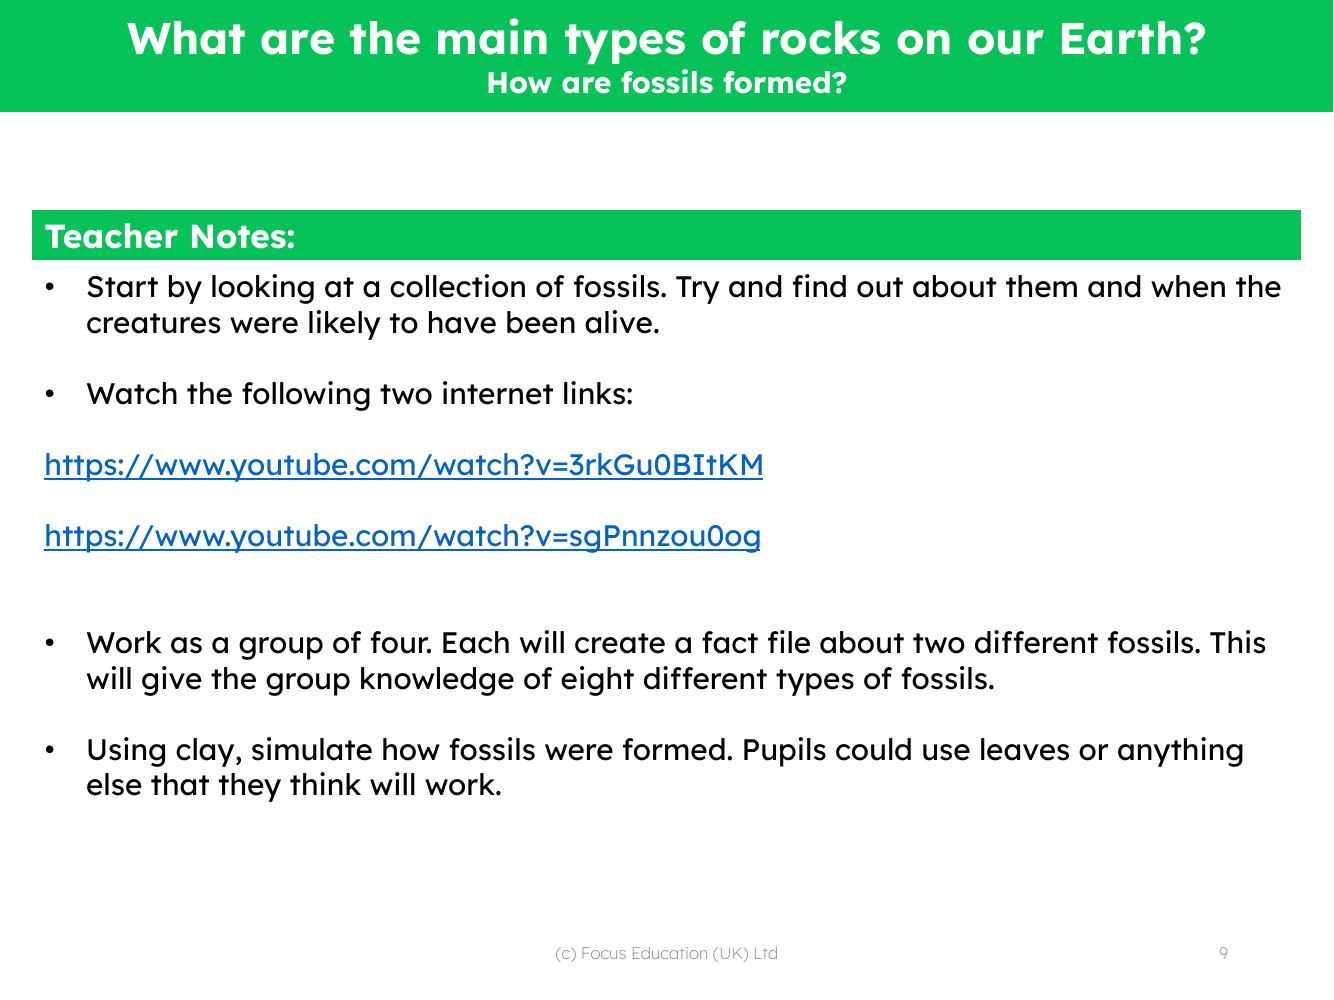 How are fossils formed? - Teacher notes